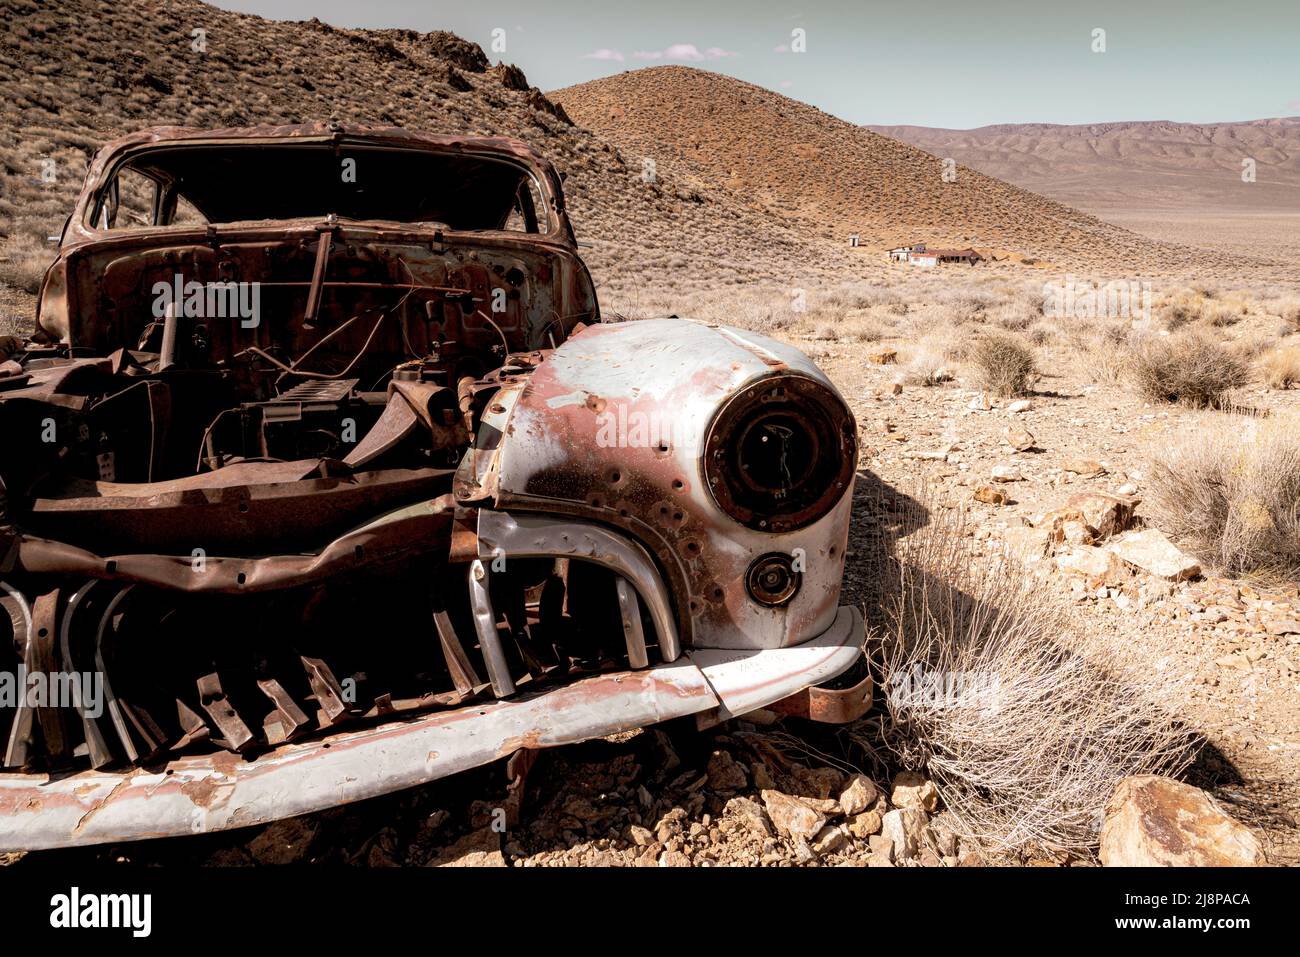 Old rusty abandoned vintage antique car in the desert Stock Photo